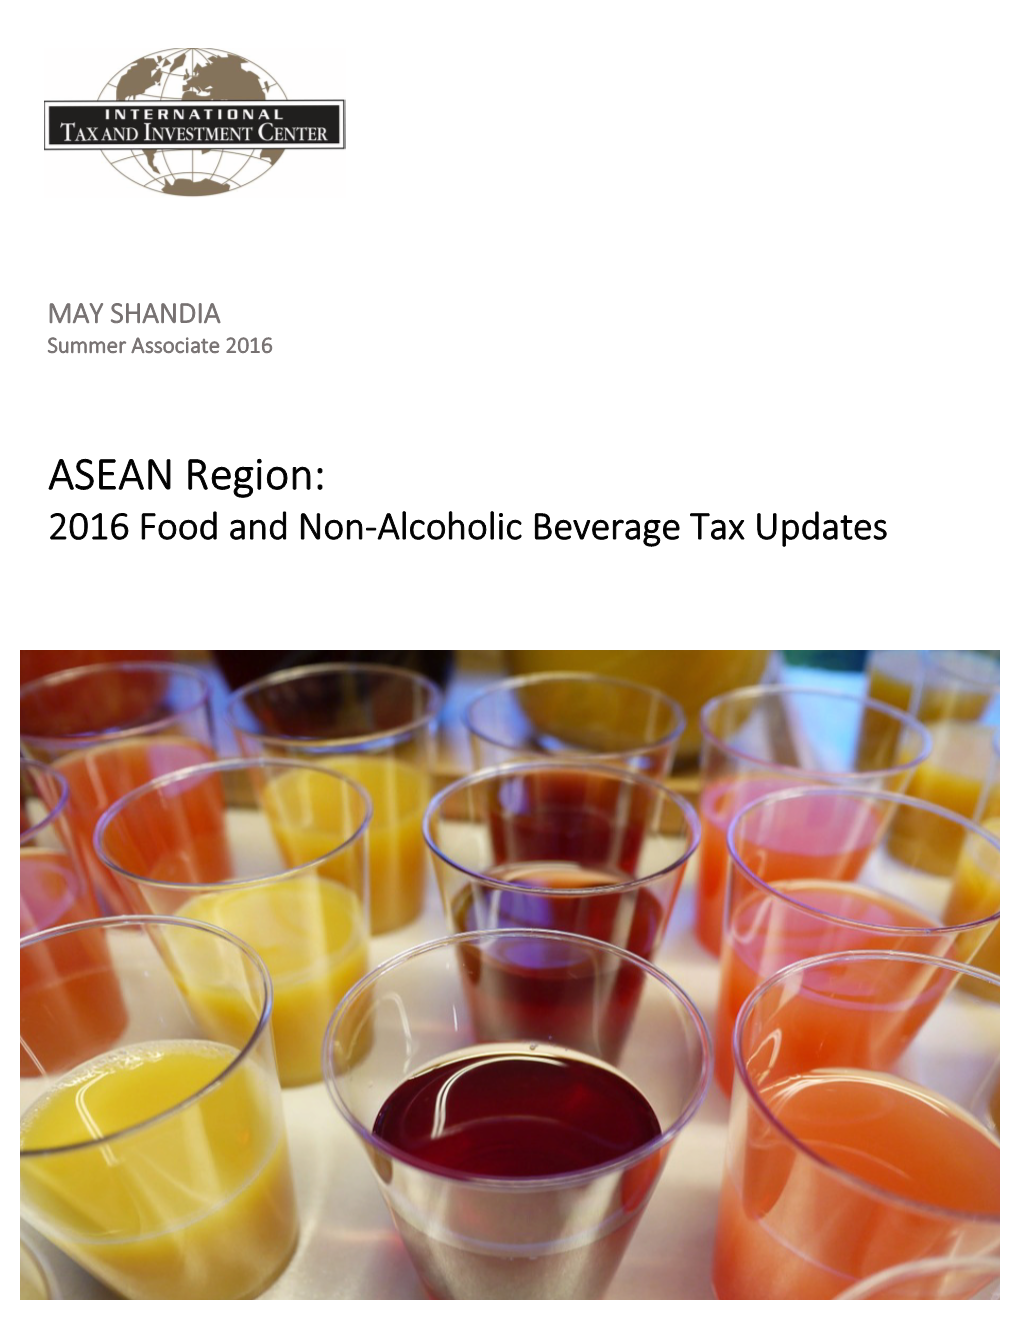 2016 Food and Non-Alcoholic Beverages Tax Updates in ASEAN Region May Shandia 20160721